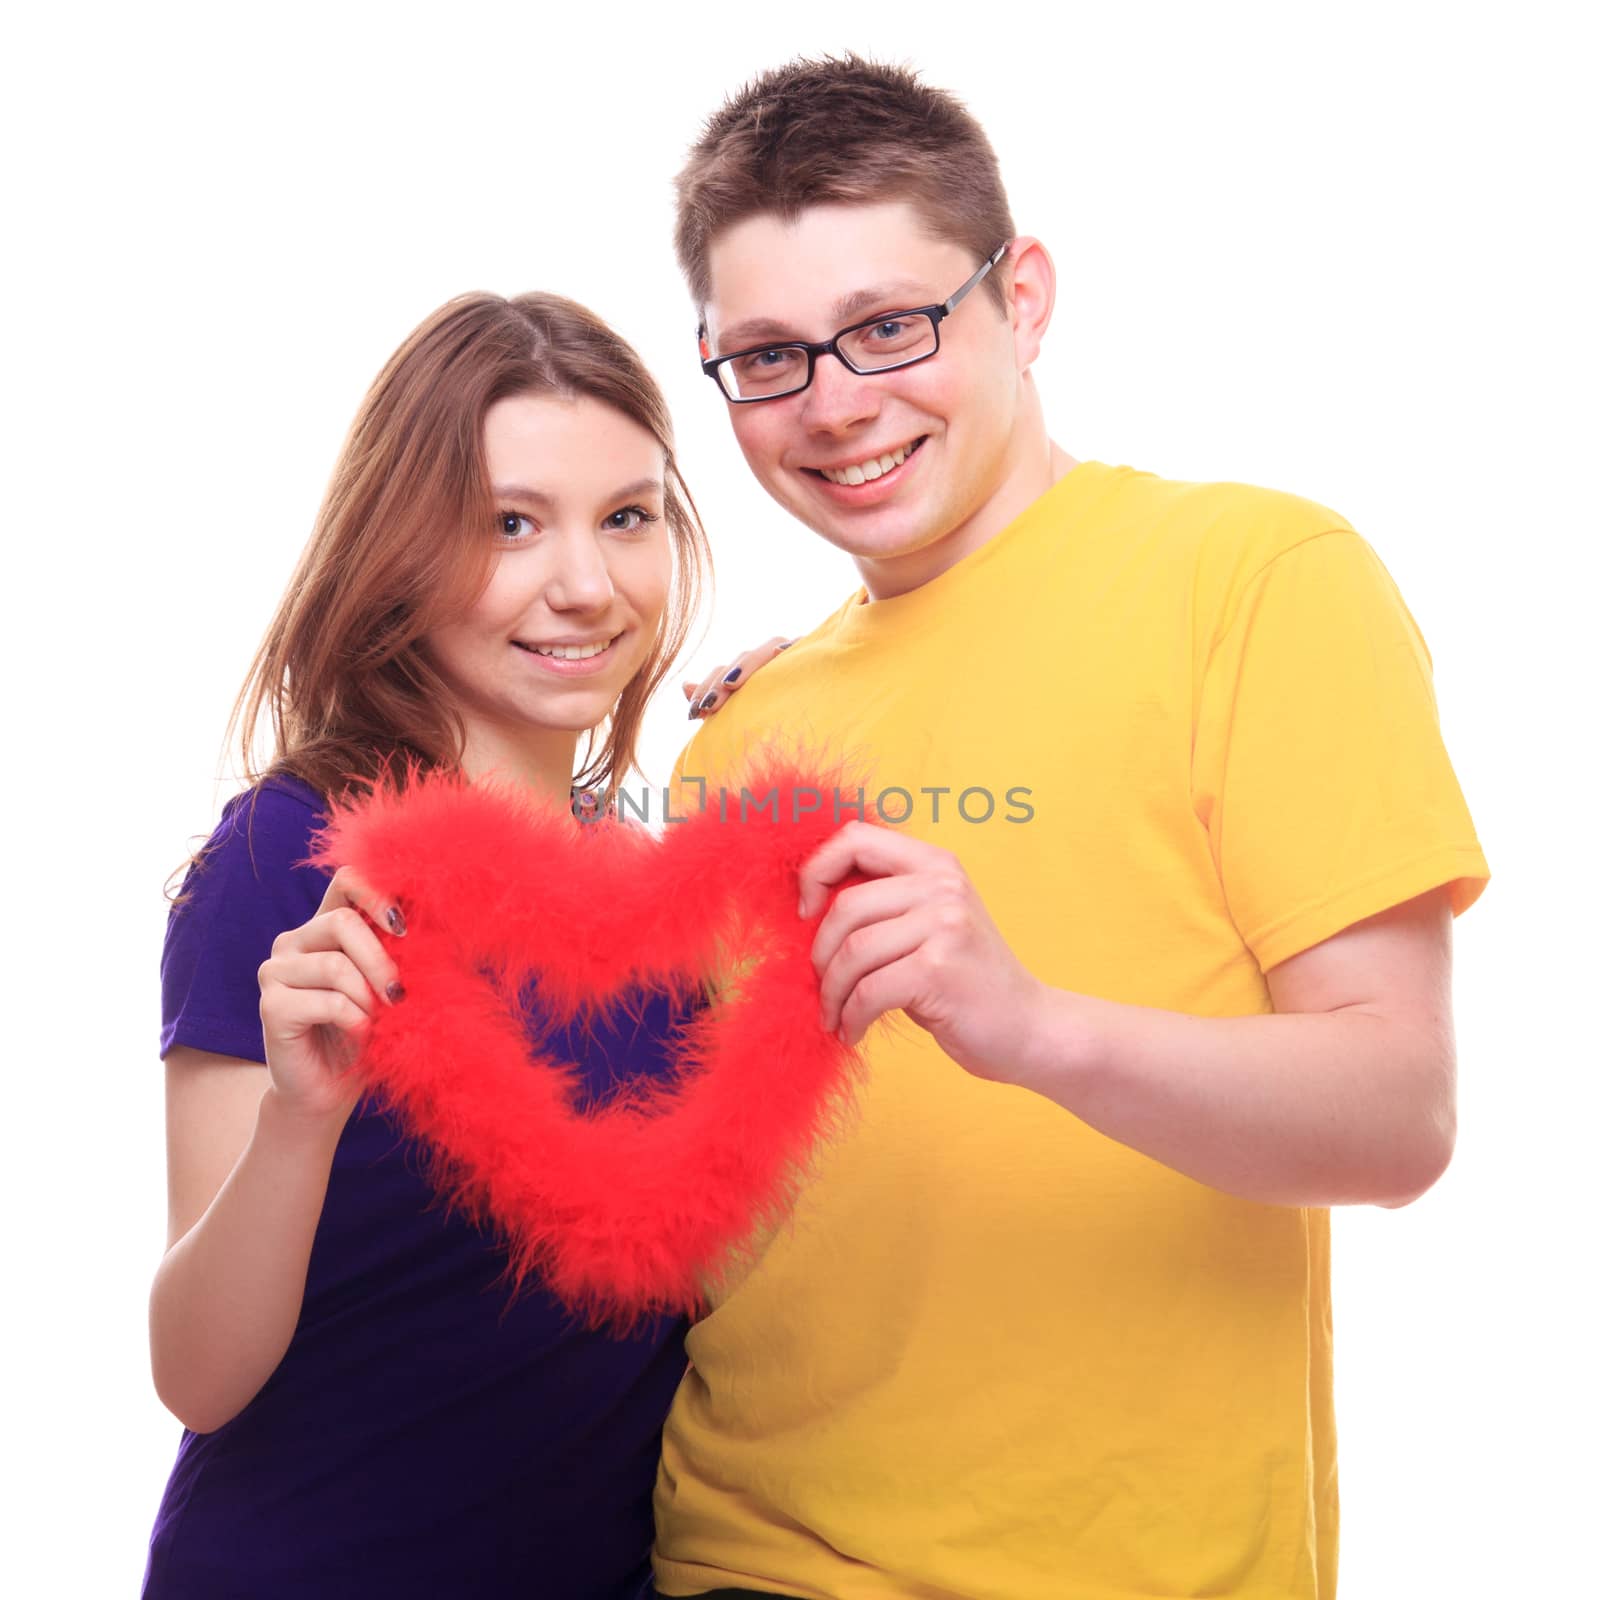 Young people in love holding heart - studio shoot 